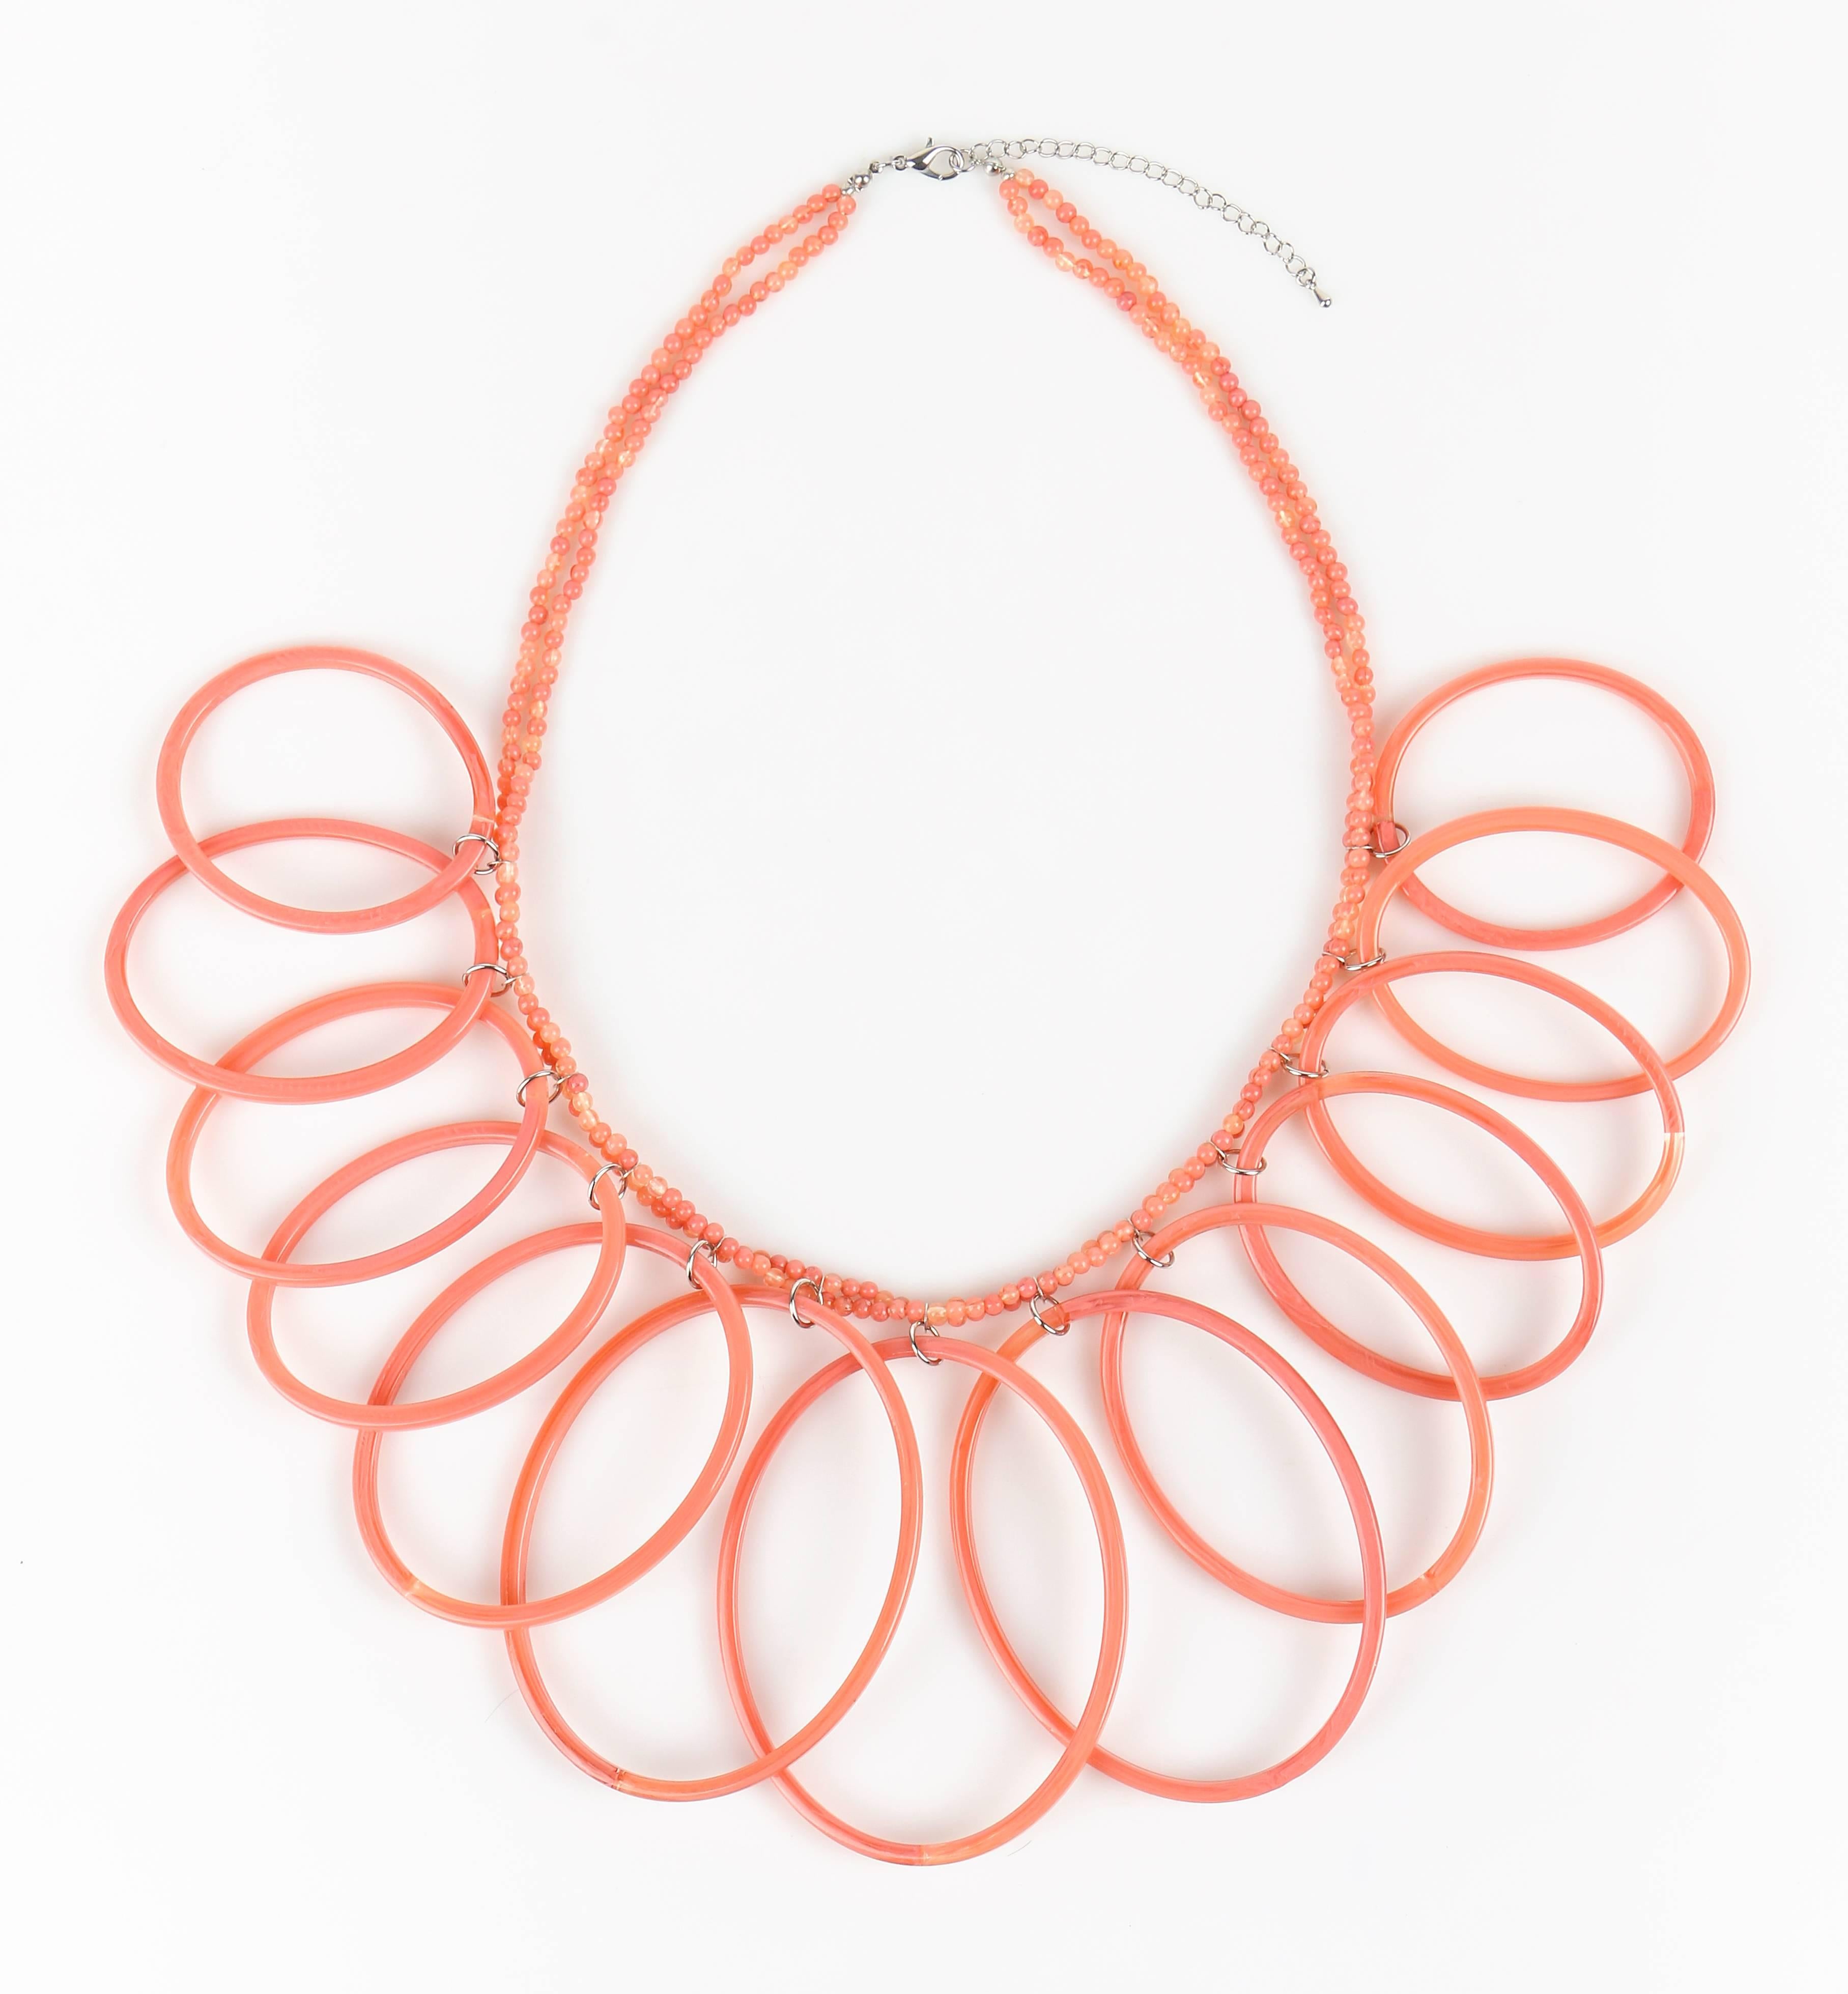 Extremely Rare - Vintage Missoni c.1980's New old stock pink salmon lucite oval hoops statement necklace. Pink salmon semi-translucent marbleized lucite like plastic. Double strand small round seed beads. Large oval hoop pendants in varying sizes